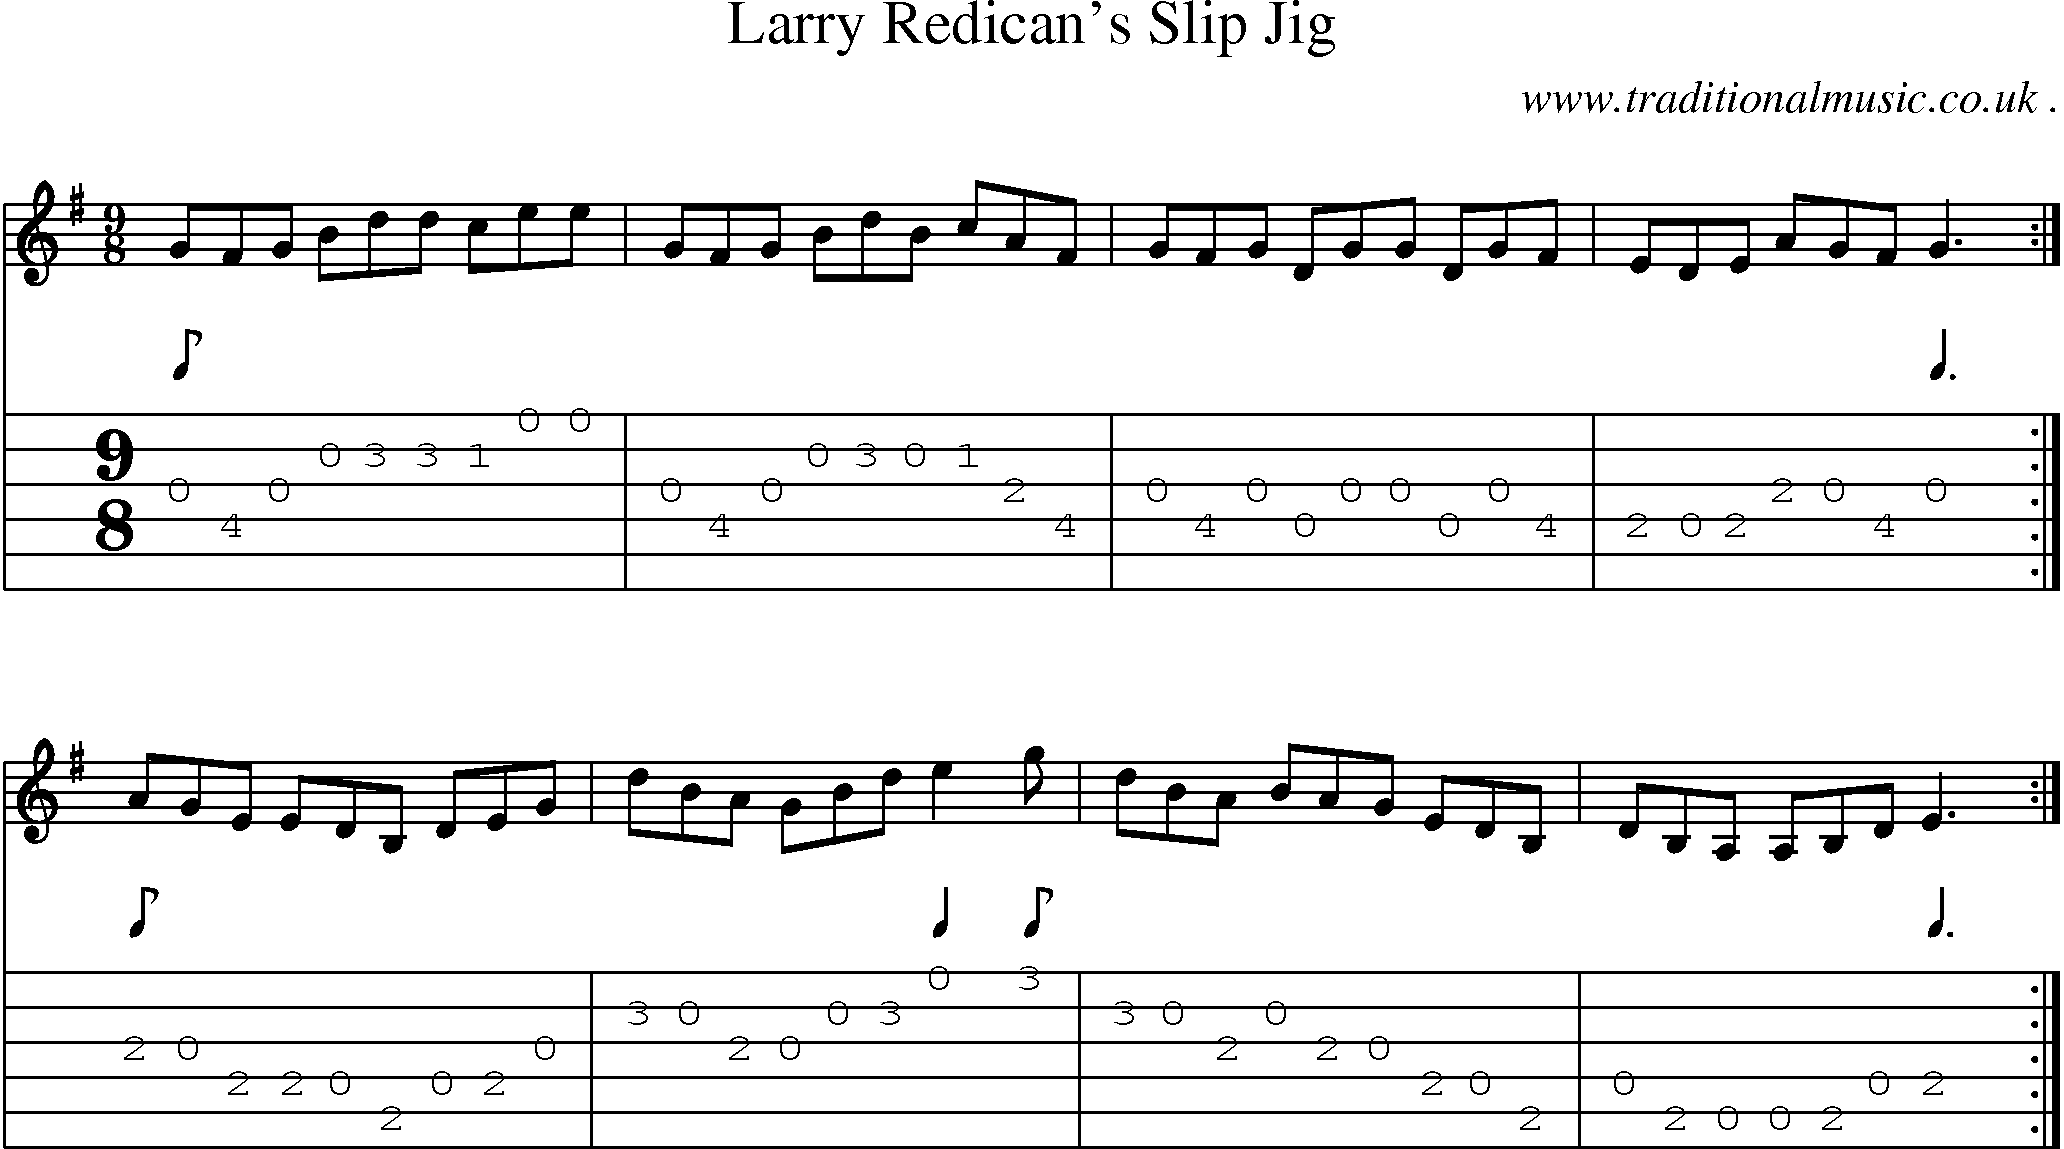 Sheet-music  score, Chords and Guitar Tabs for Larry Redicans Slip Jig